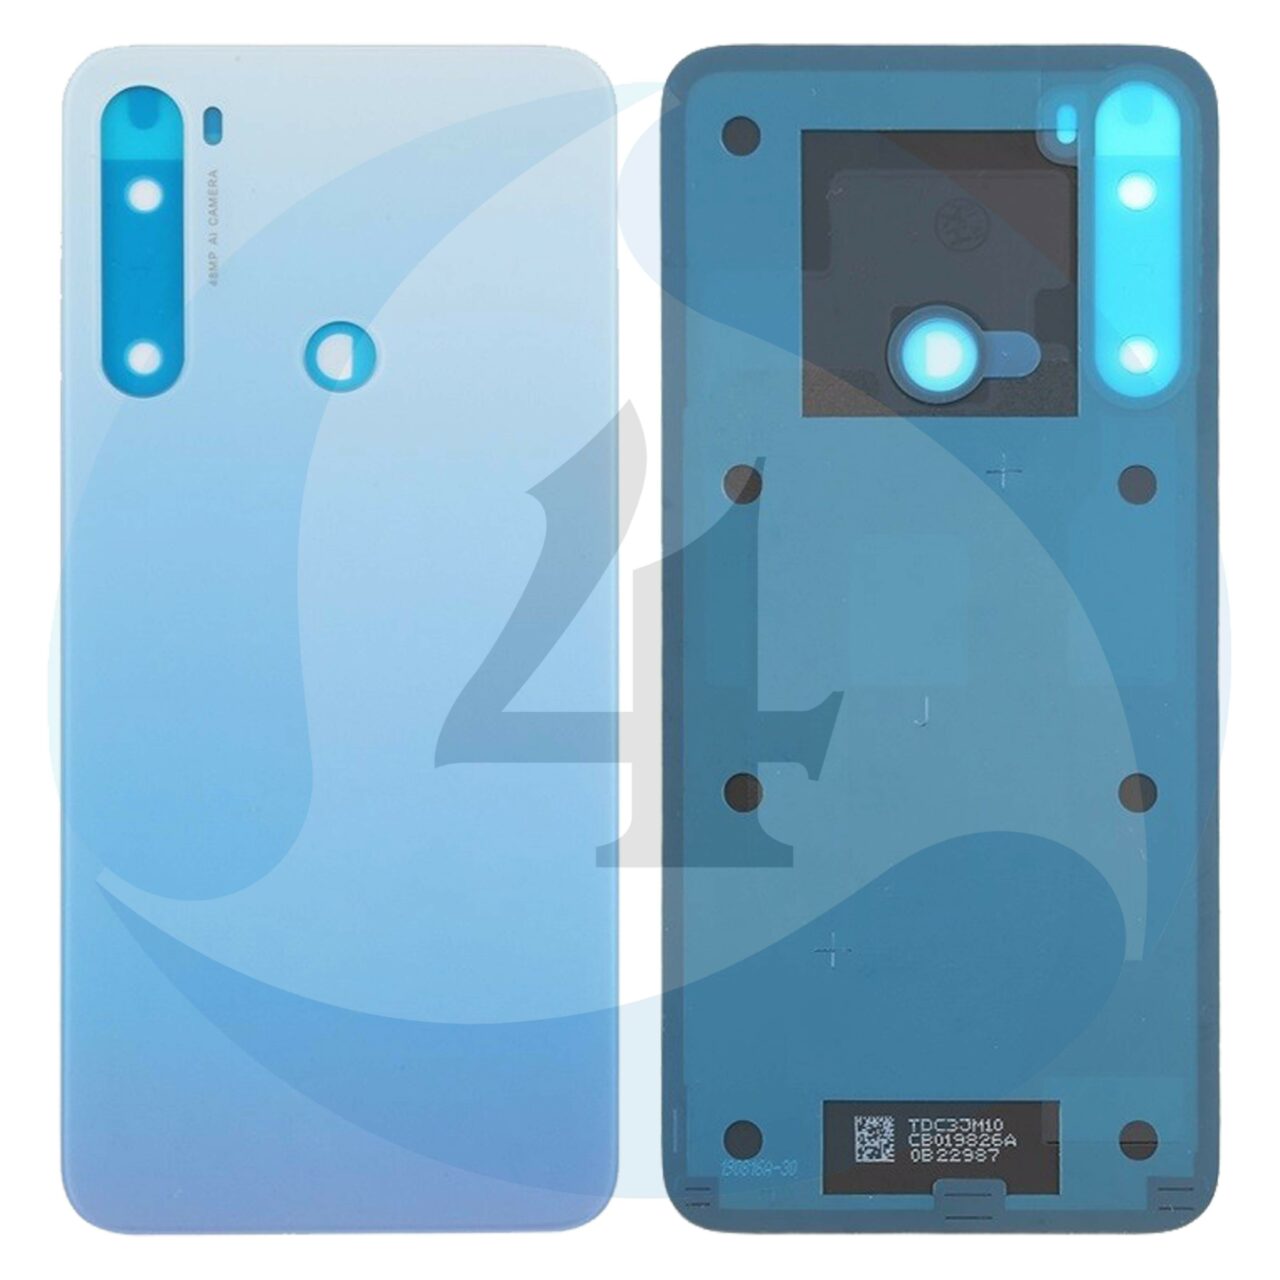 Backcover white For Xiaomi Redmi Note 8 T M1908 C3 XG batterijcover